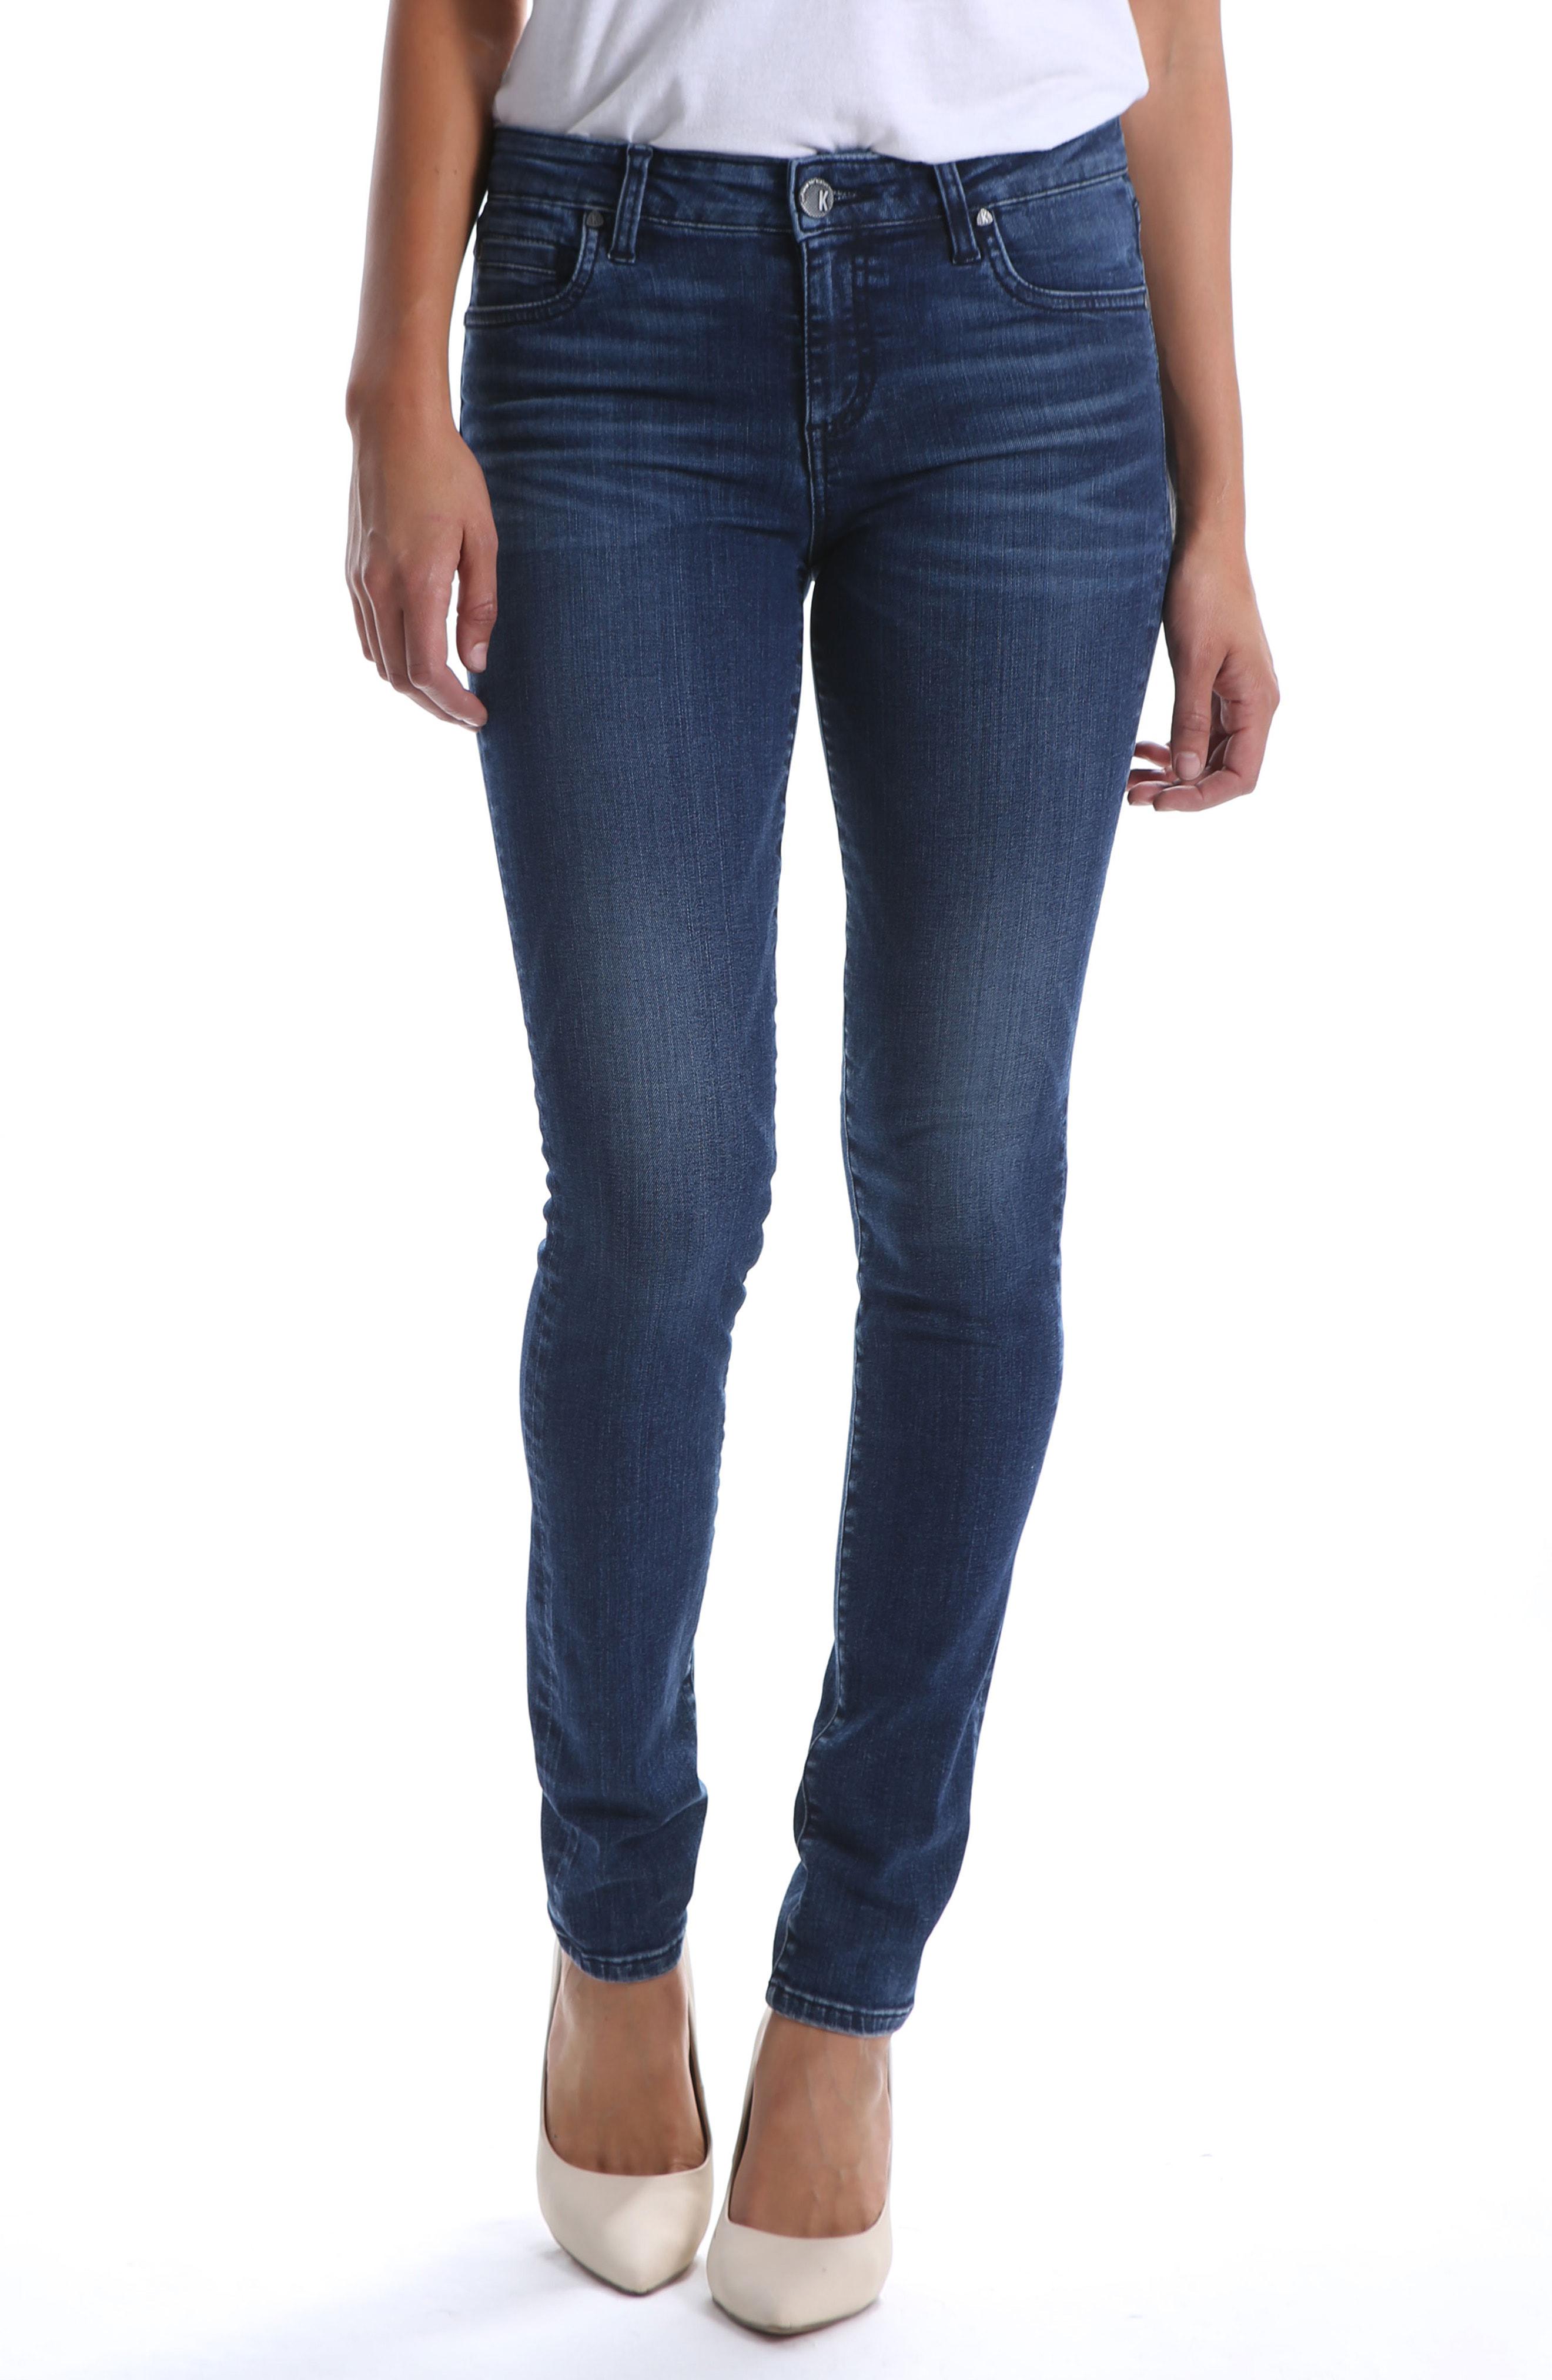 Lyst - Kut From The Kloth Diana Skinny Jeans in Blue